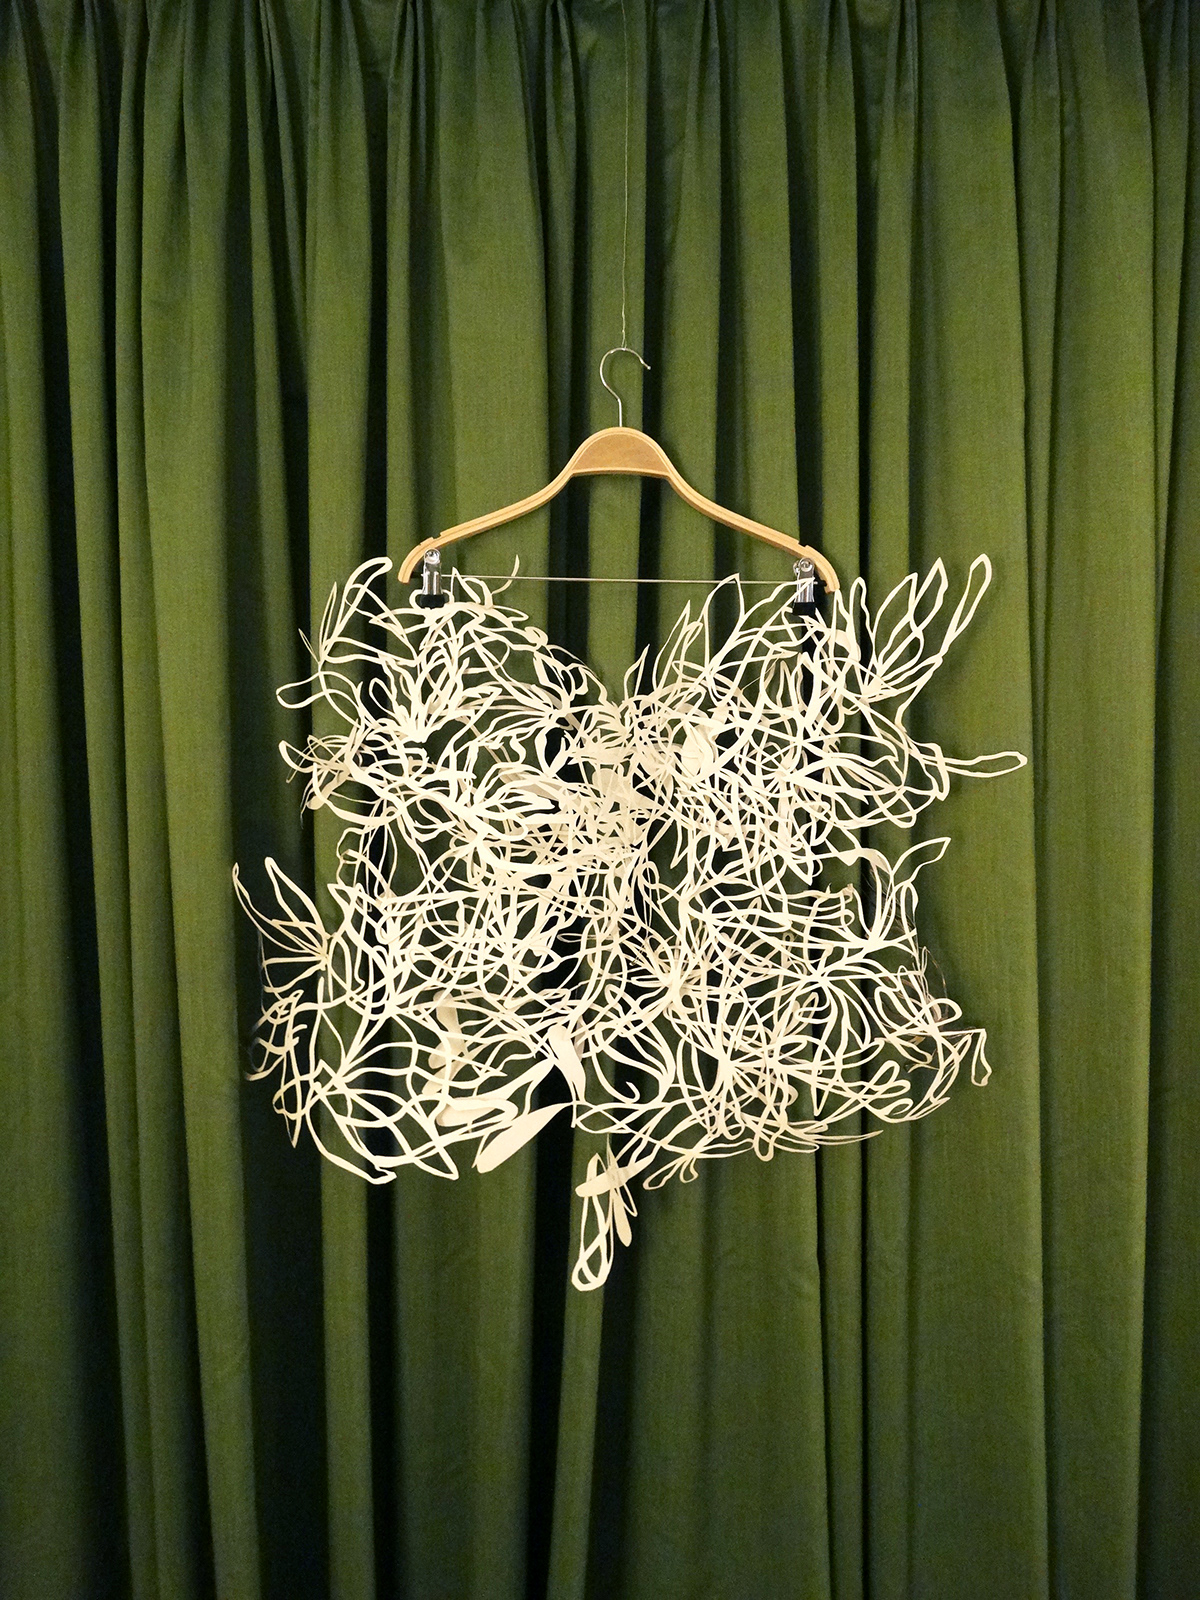 paper installation presented in Fashion Room Service Spring 2018, Hilto Hotel Athens